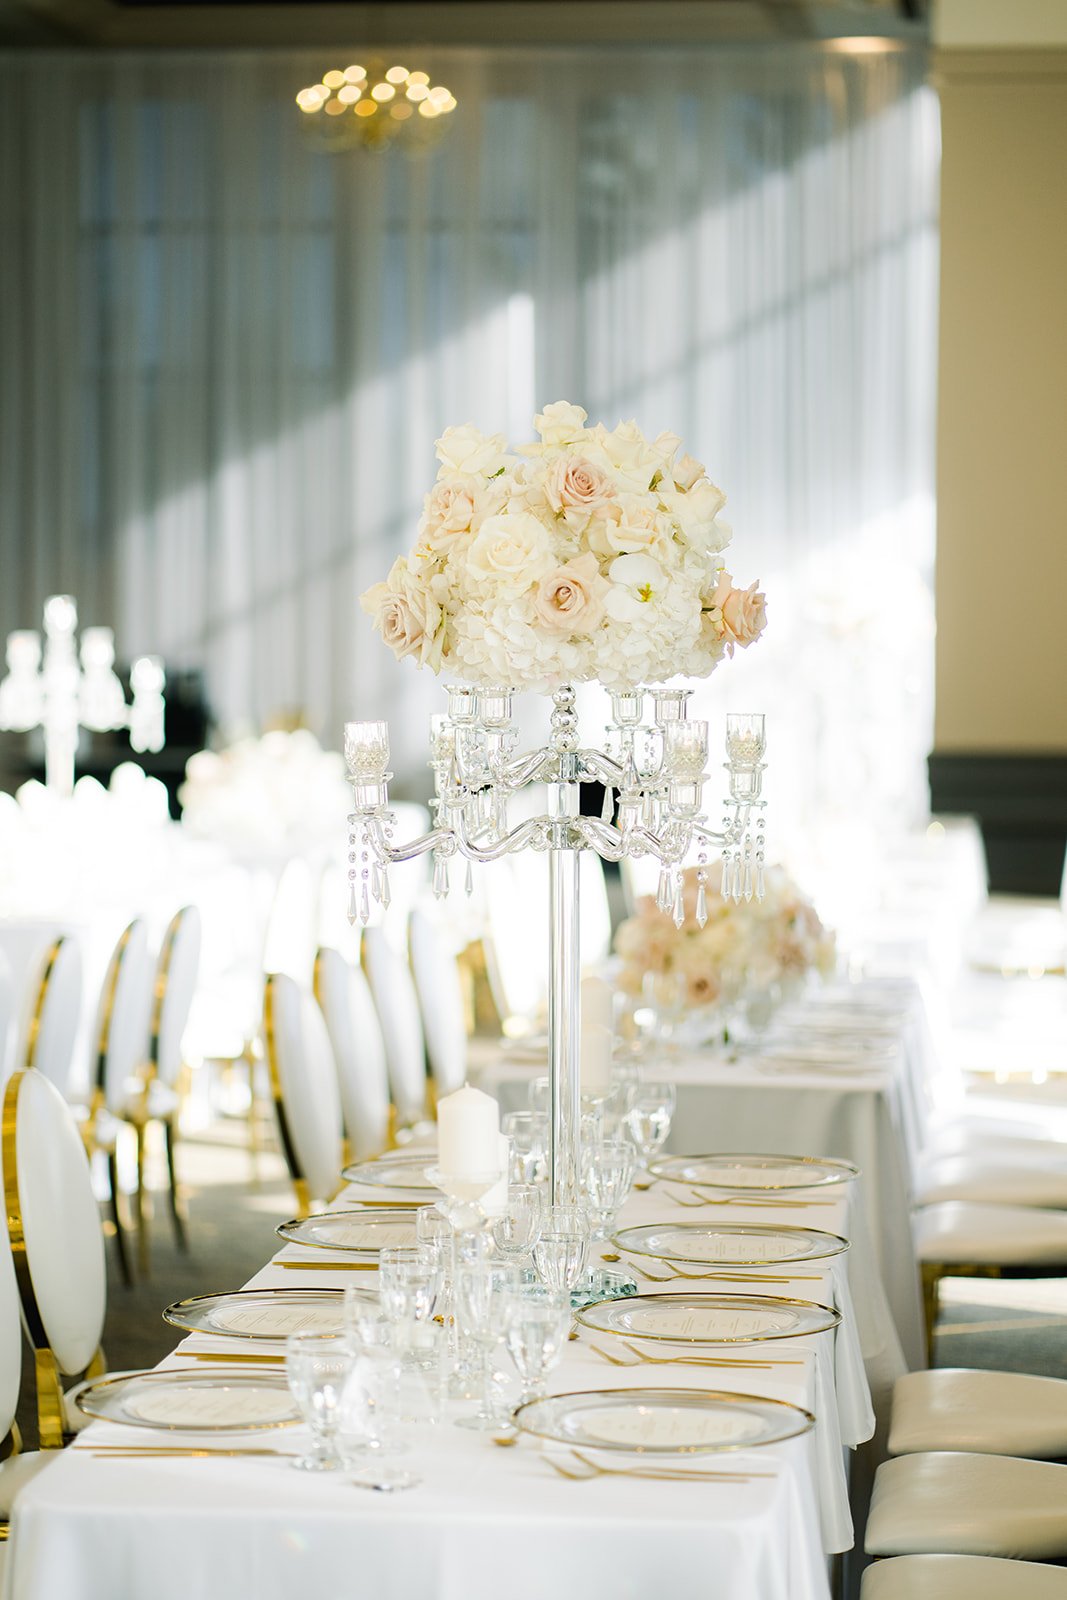 Pink and white floral centrepiece in tall stands amid golden place settings on reception table at Swaneset.  